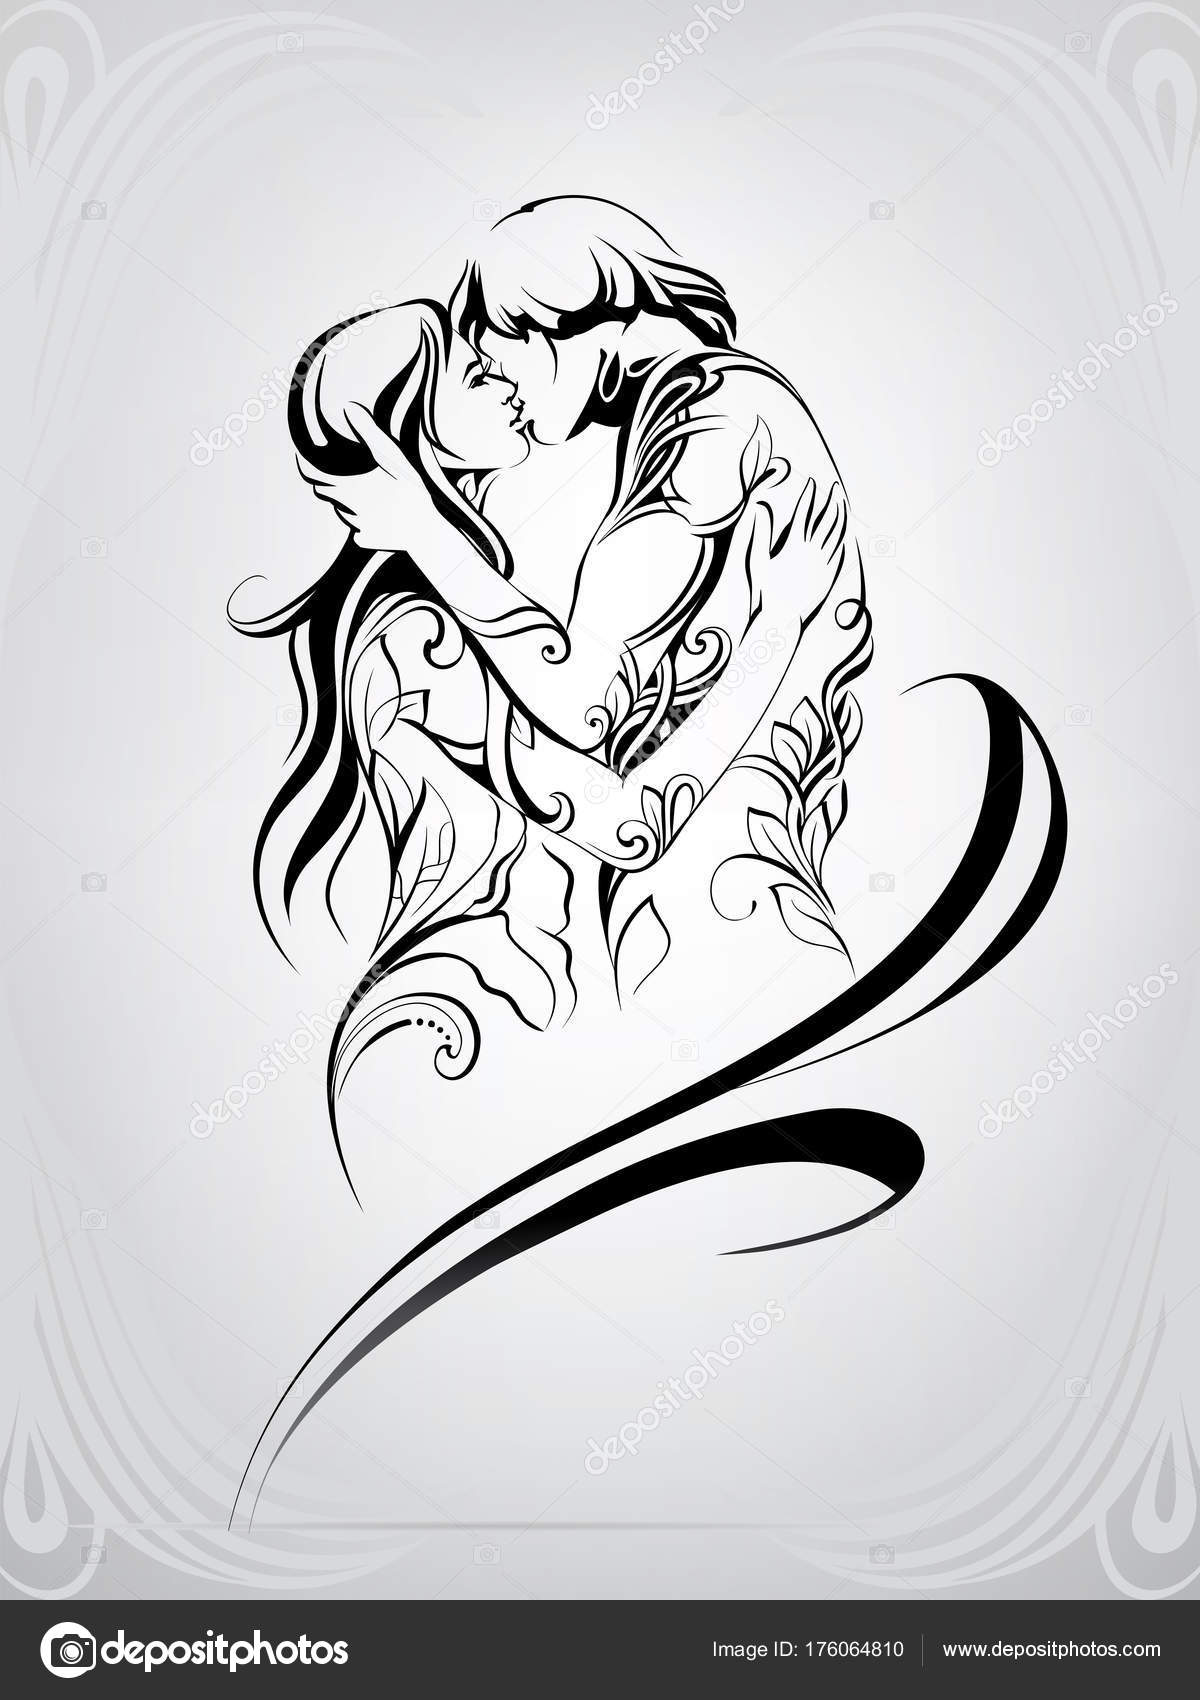 26 Couple kissing tattoo Vector Images